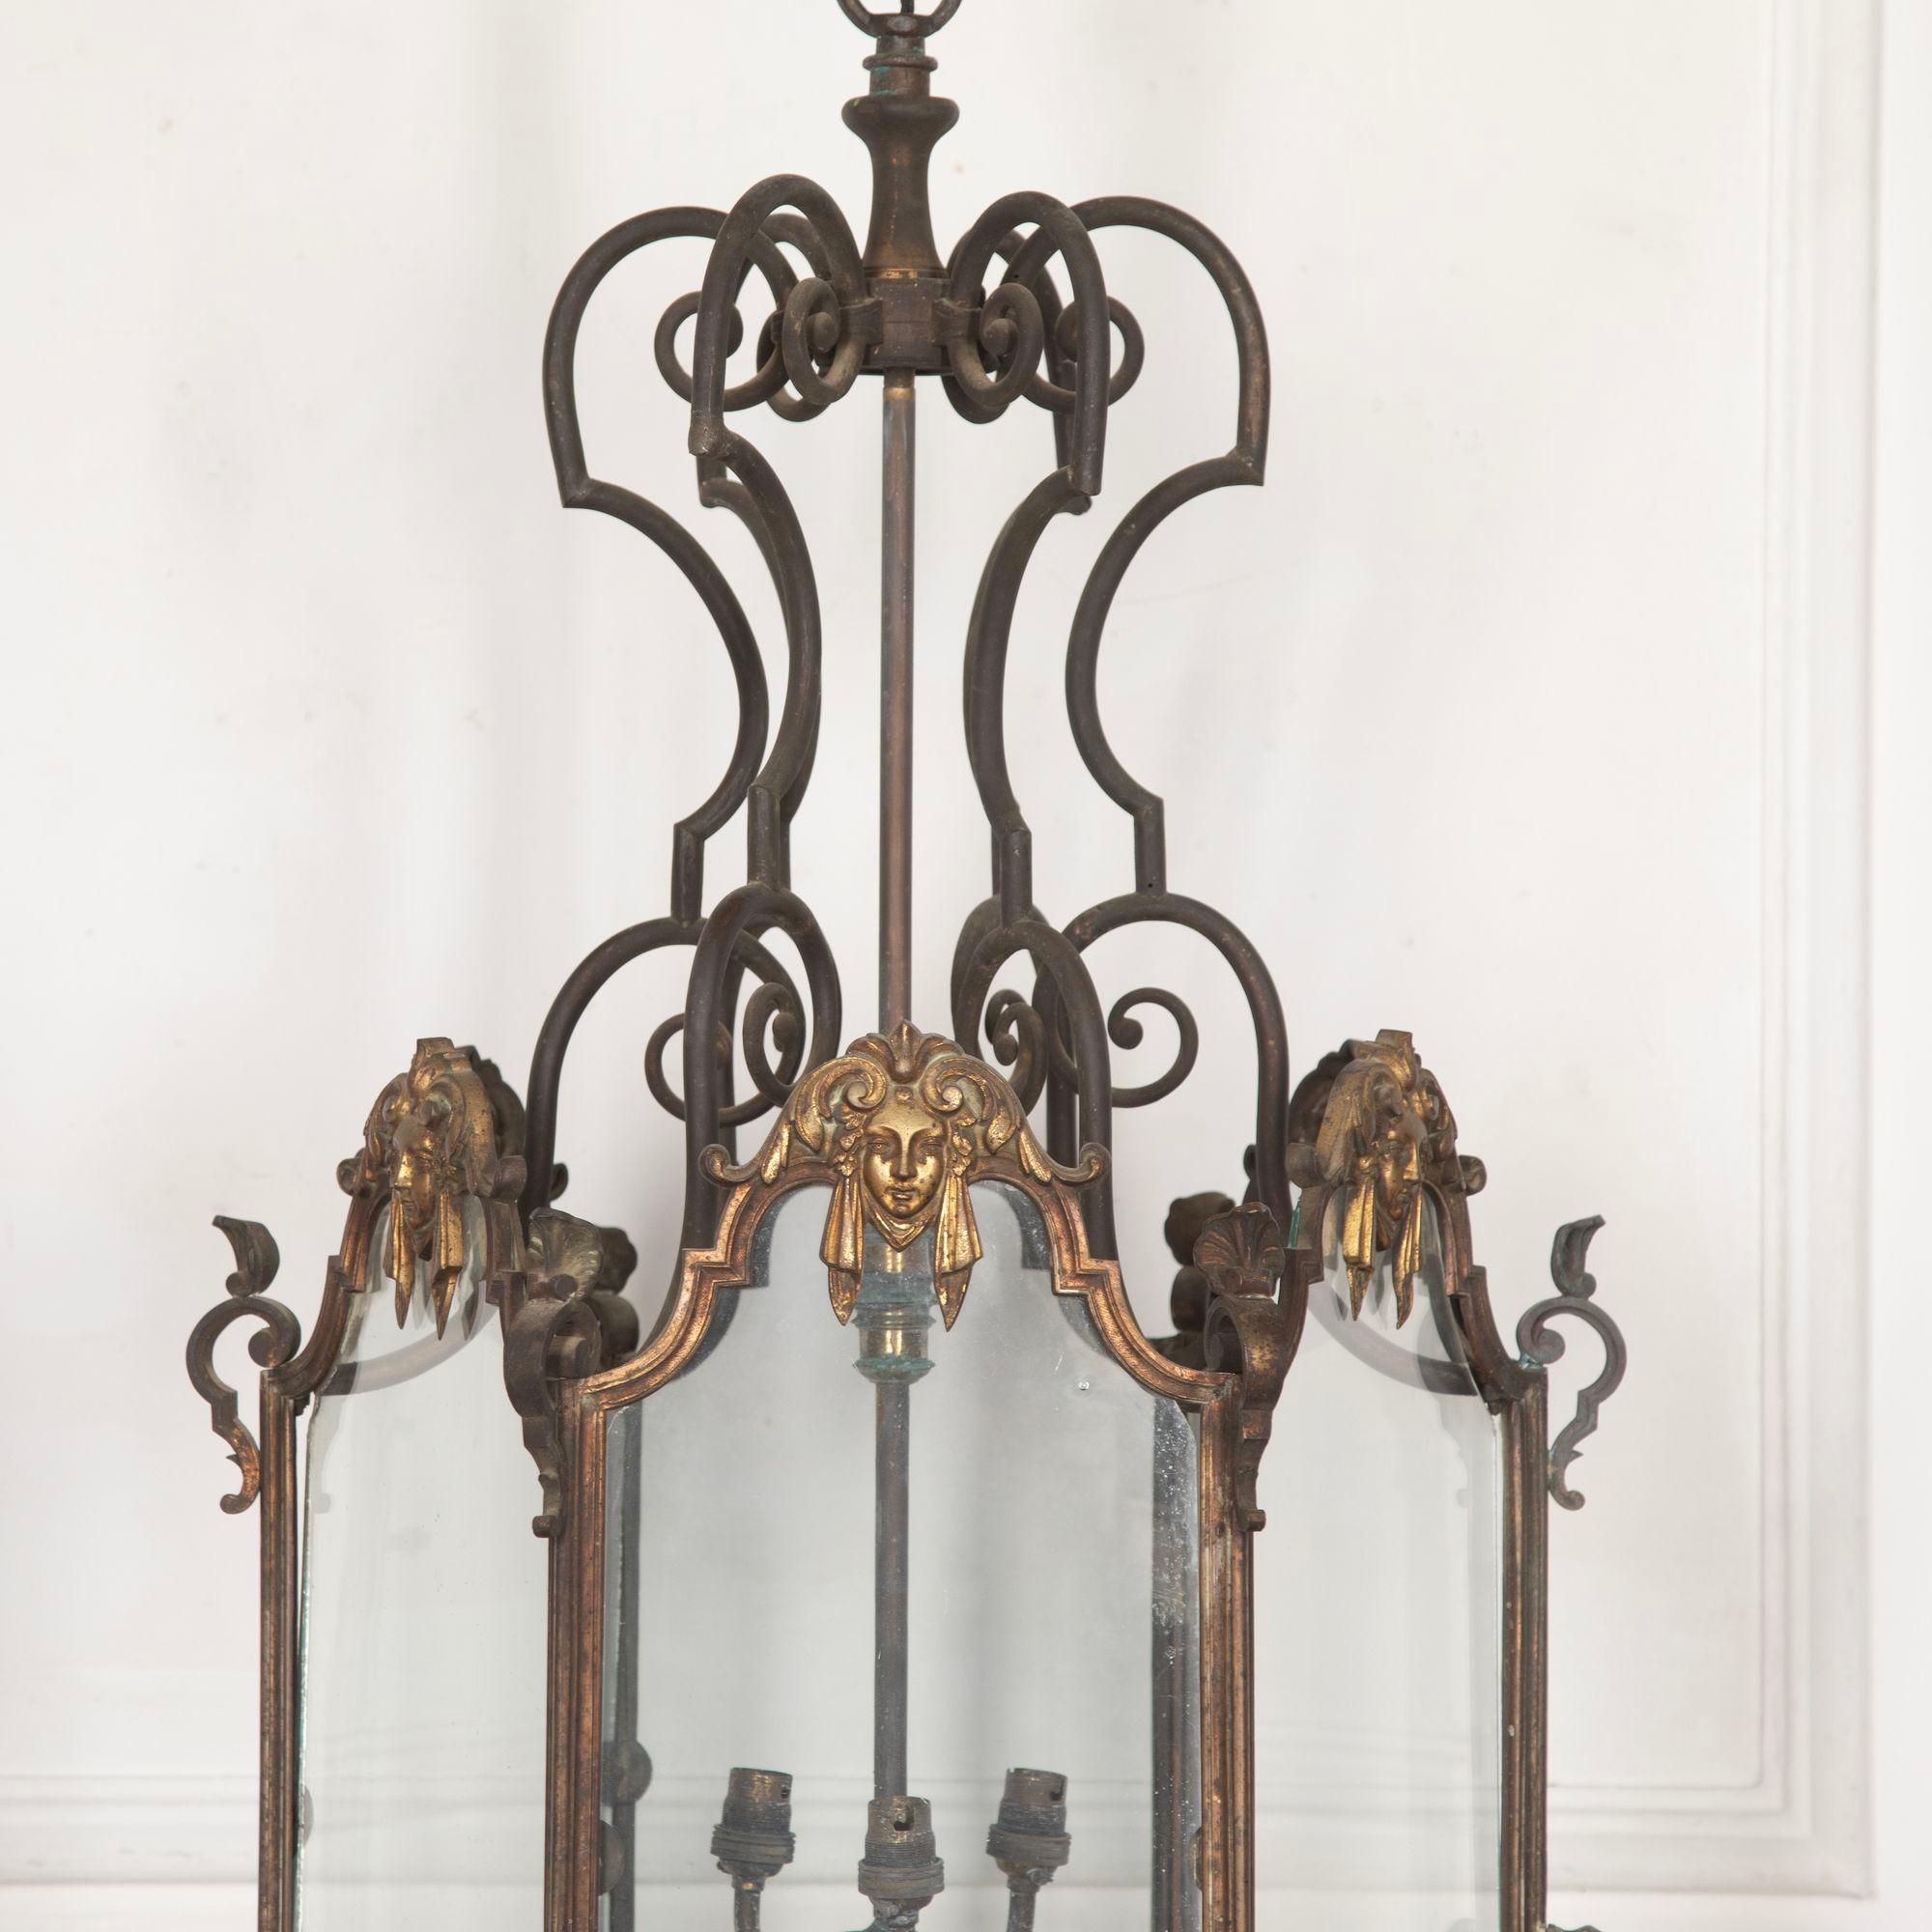 19th Century French bronze lantern.
With 'Diana' casting with scallop shells and grapes.
Circa 1860.
This item has passed PAT testing according to UK standards.